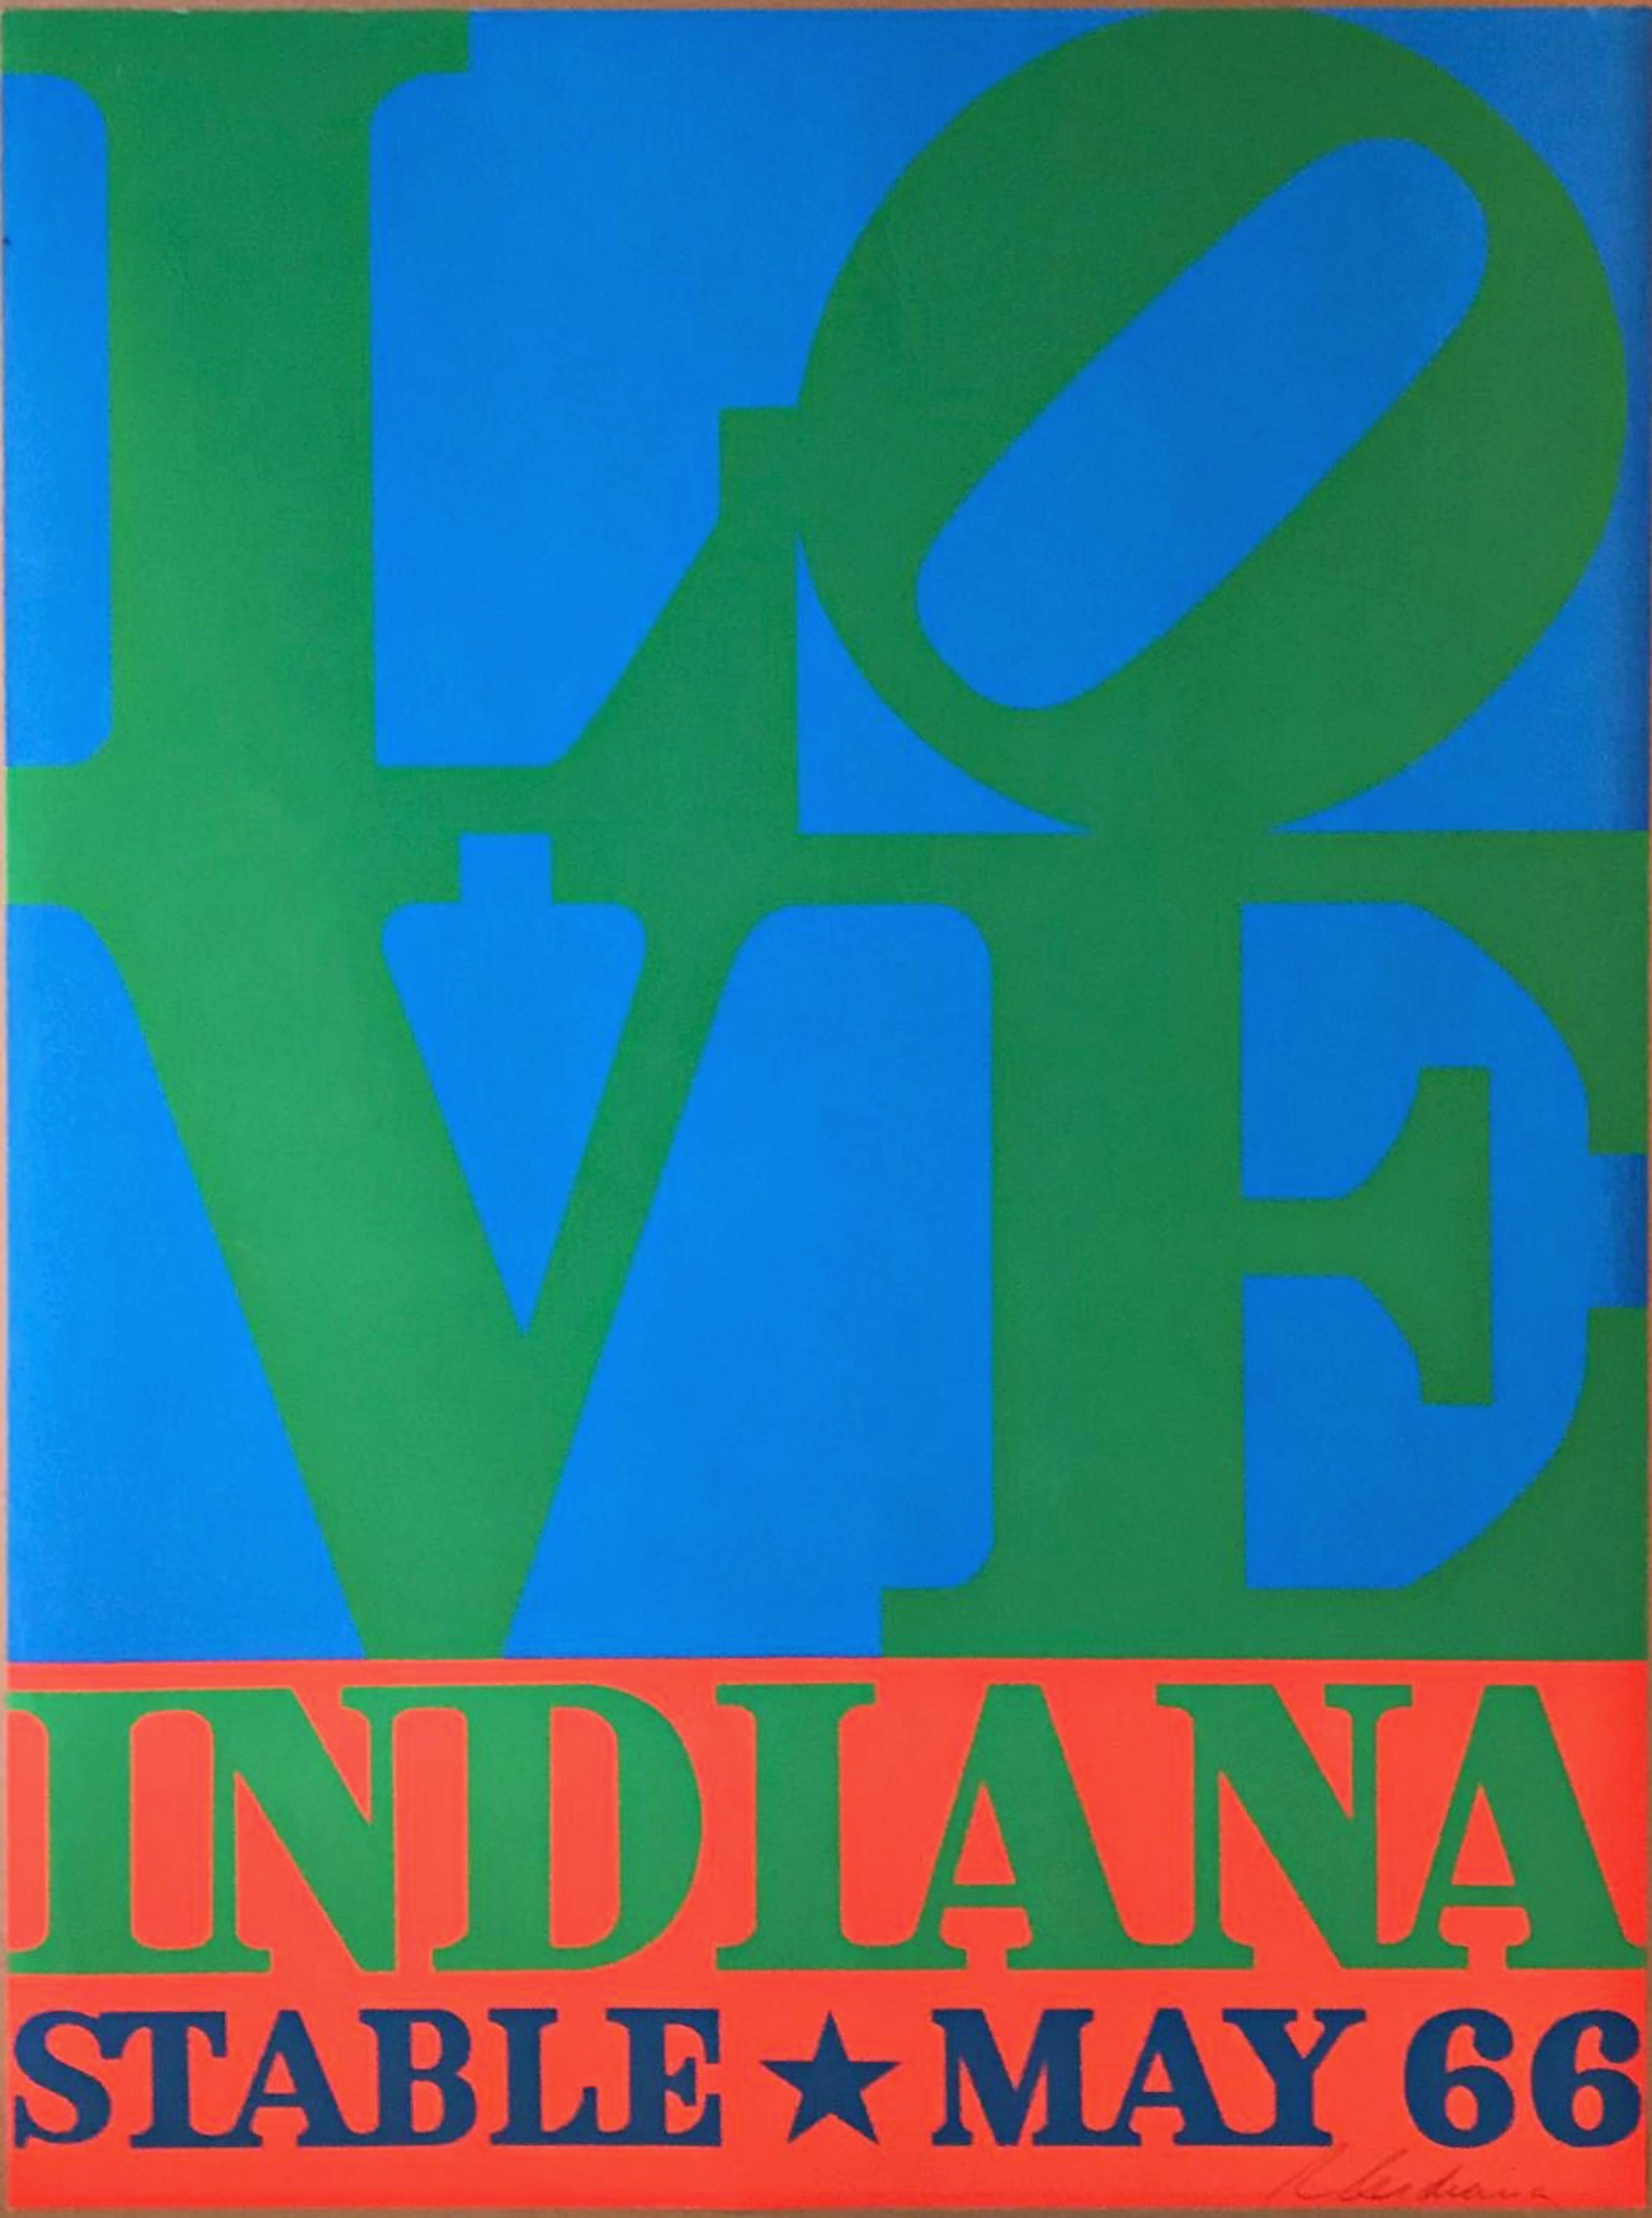 Robert Indiana
LOVE, Stable Gallery (Hand Signed), 1966
Silkscreen on wove paper. Hand signed by Robert Indiana
33 1/2 × 24 inches
Hand Signed lower right front 
Published by the Stable Gallery
Unframed
This is the original silkscreen poster from